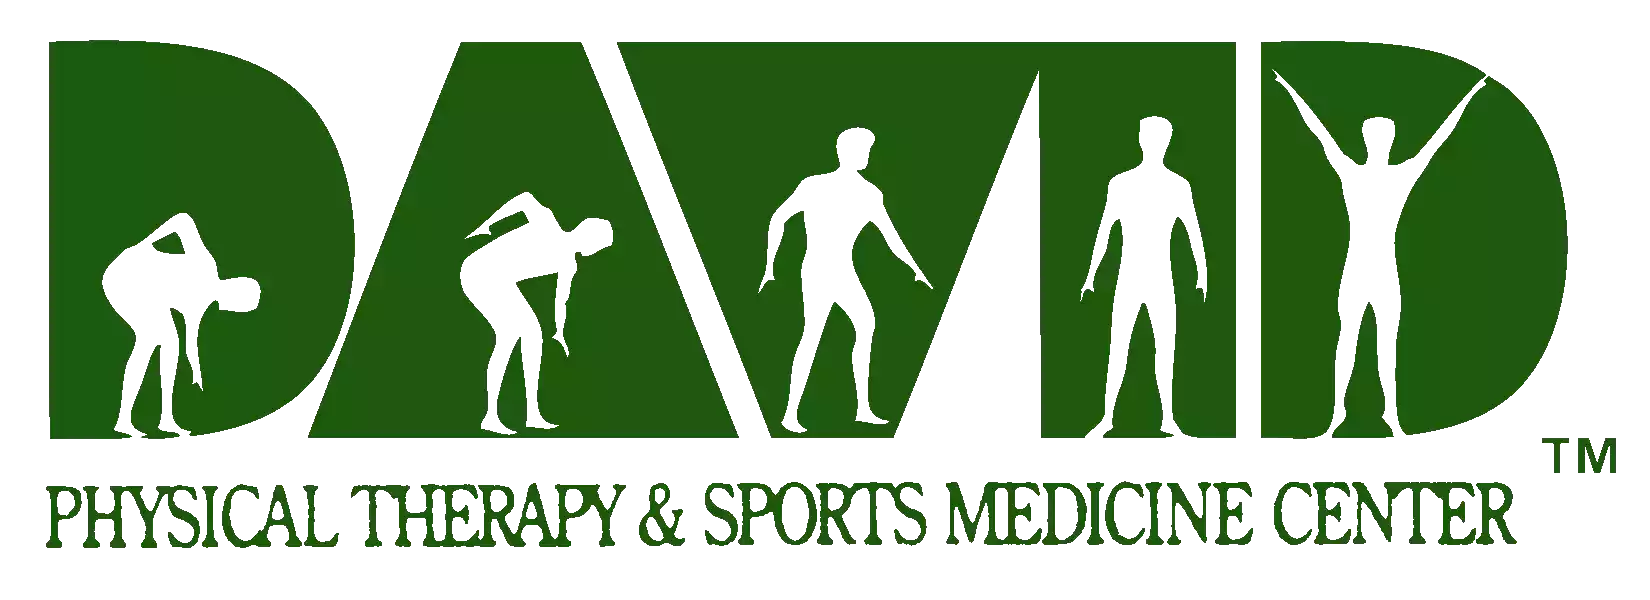 sports physical form pa
 Patient Forms - Pittsburgh, PA - David Physical Therapy ...